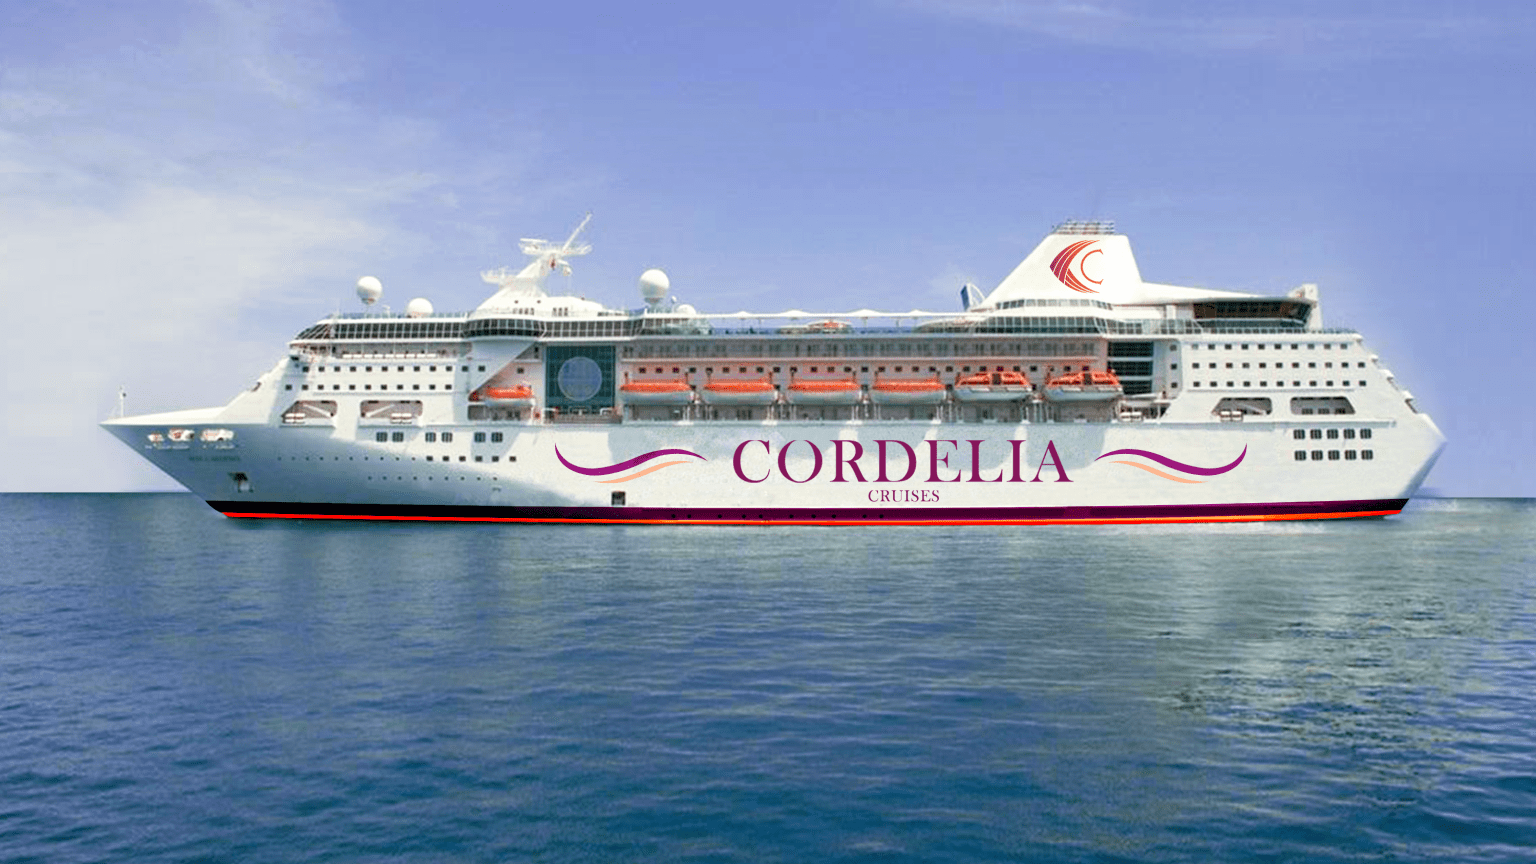 Cordelia Cruises marks one great year in India with 100+ sails, hosts 1